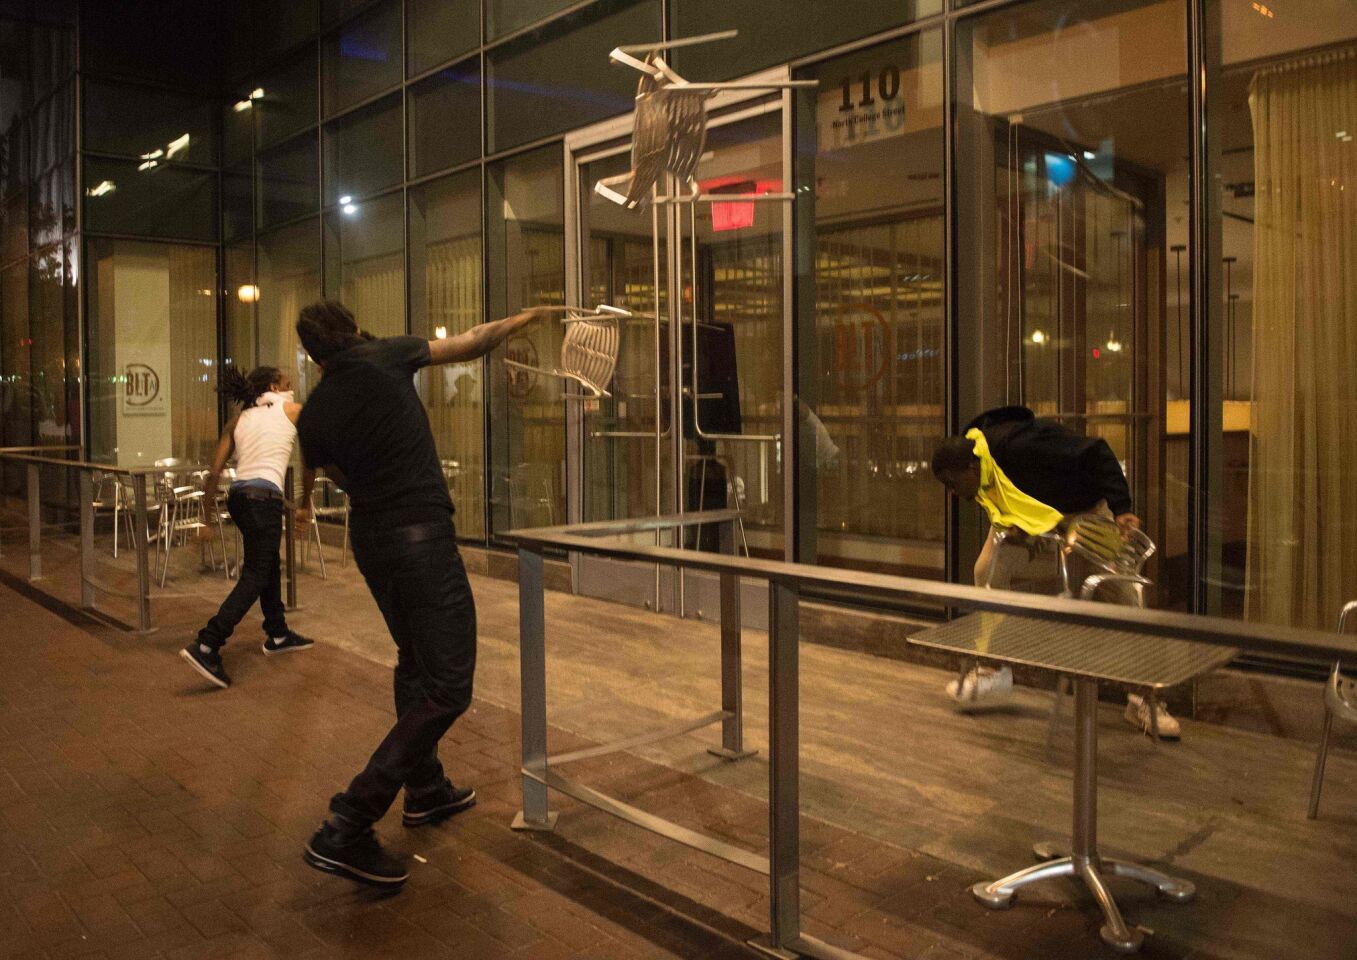 Protesters throw chairs at a restaurant during a demonstration against the use of deadly force by police in Charlotte, N.C.